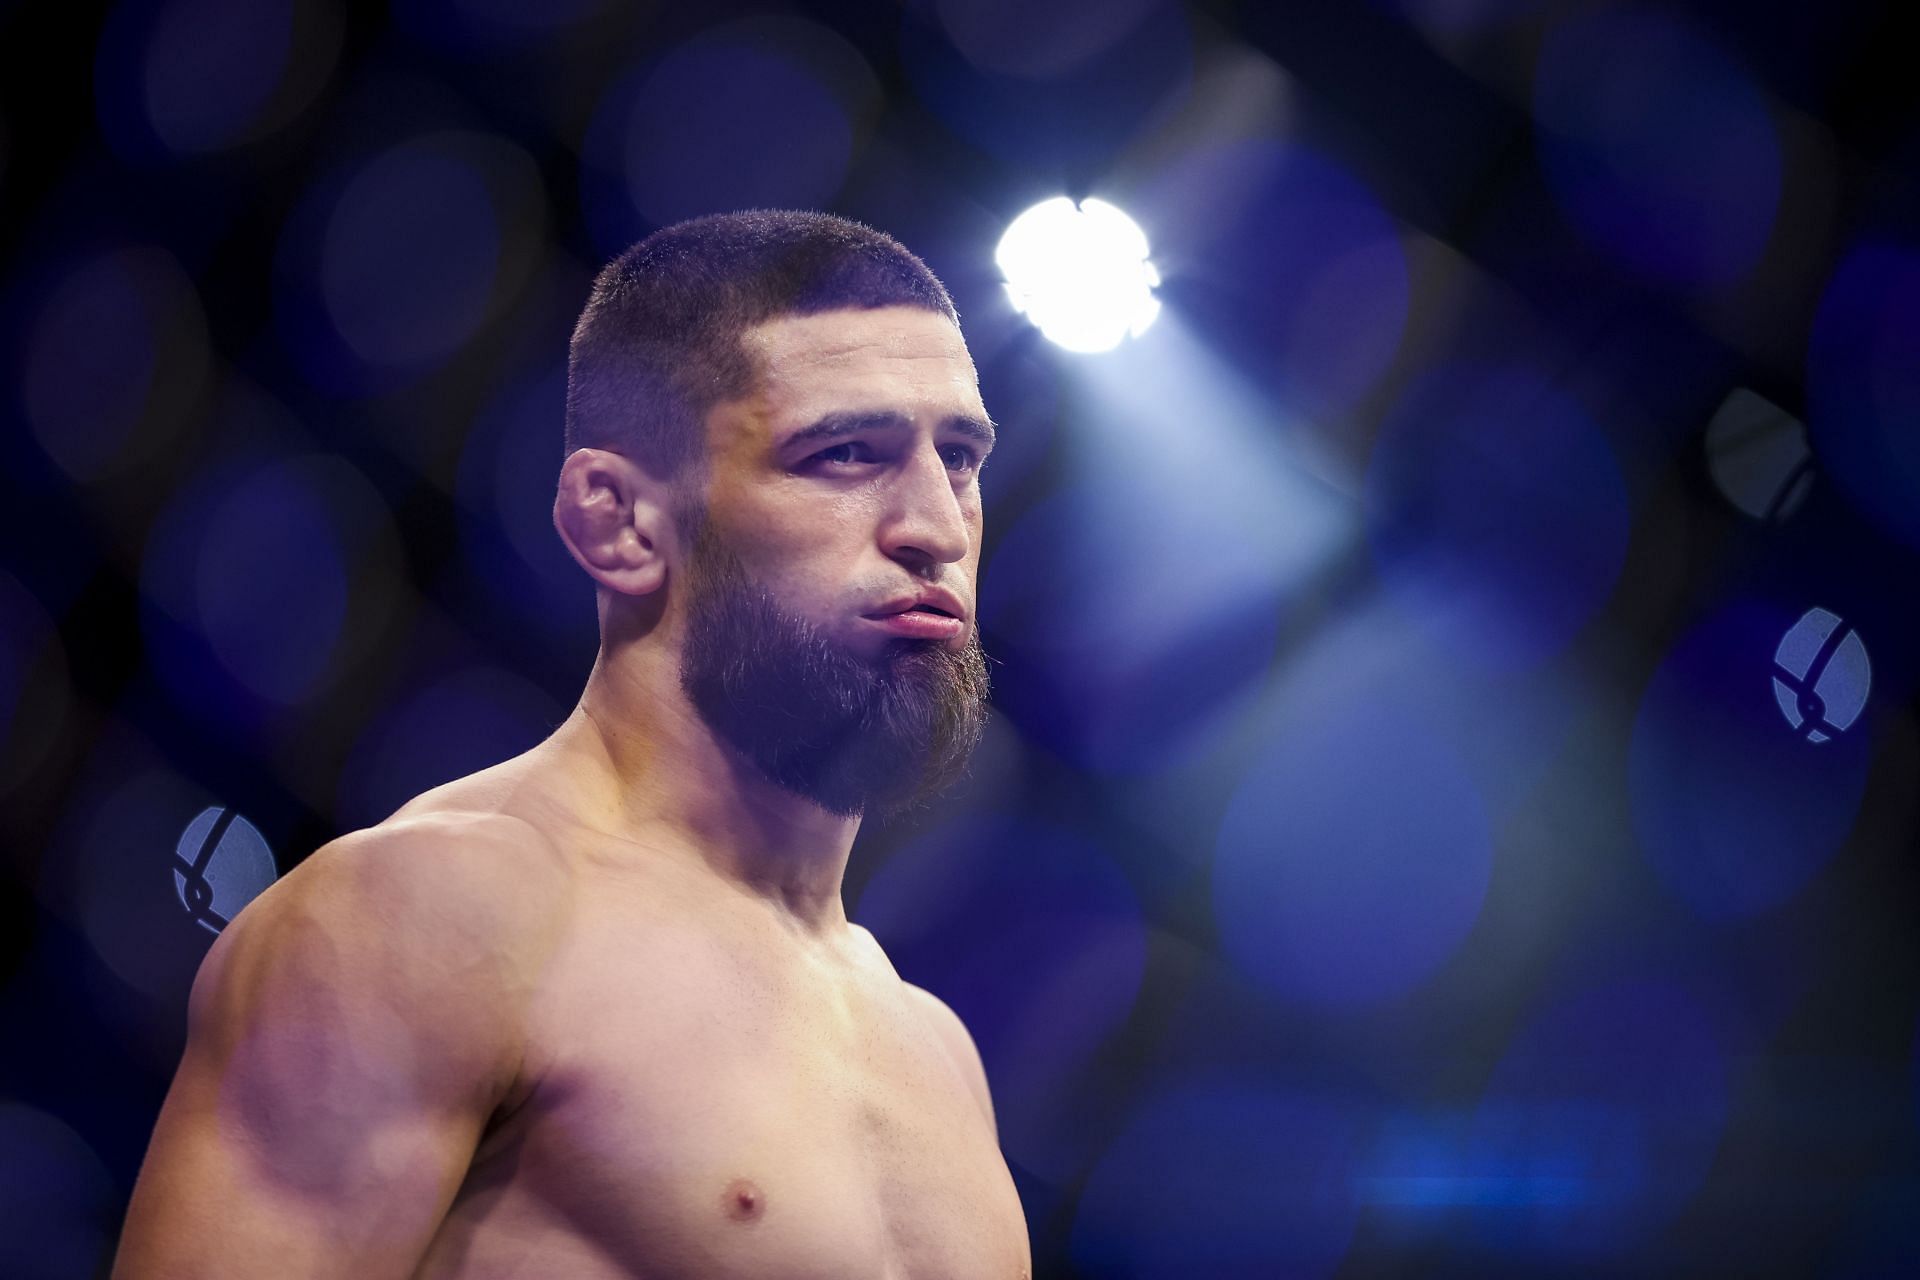 A weight cutting mistake from Khamzat Chimaev resulted in major changes to UFC 279